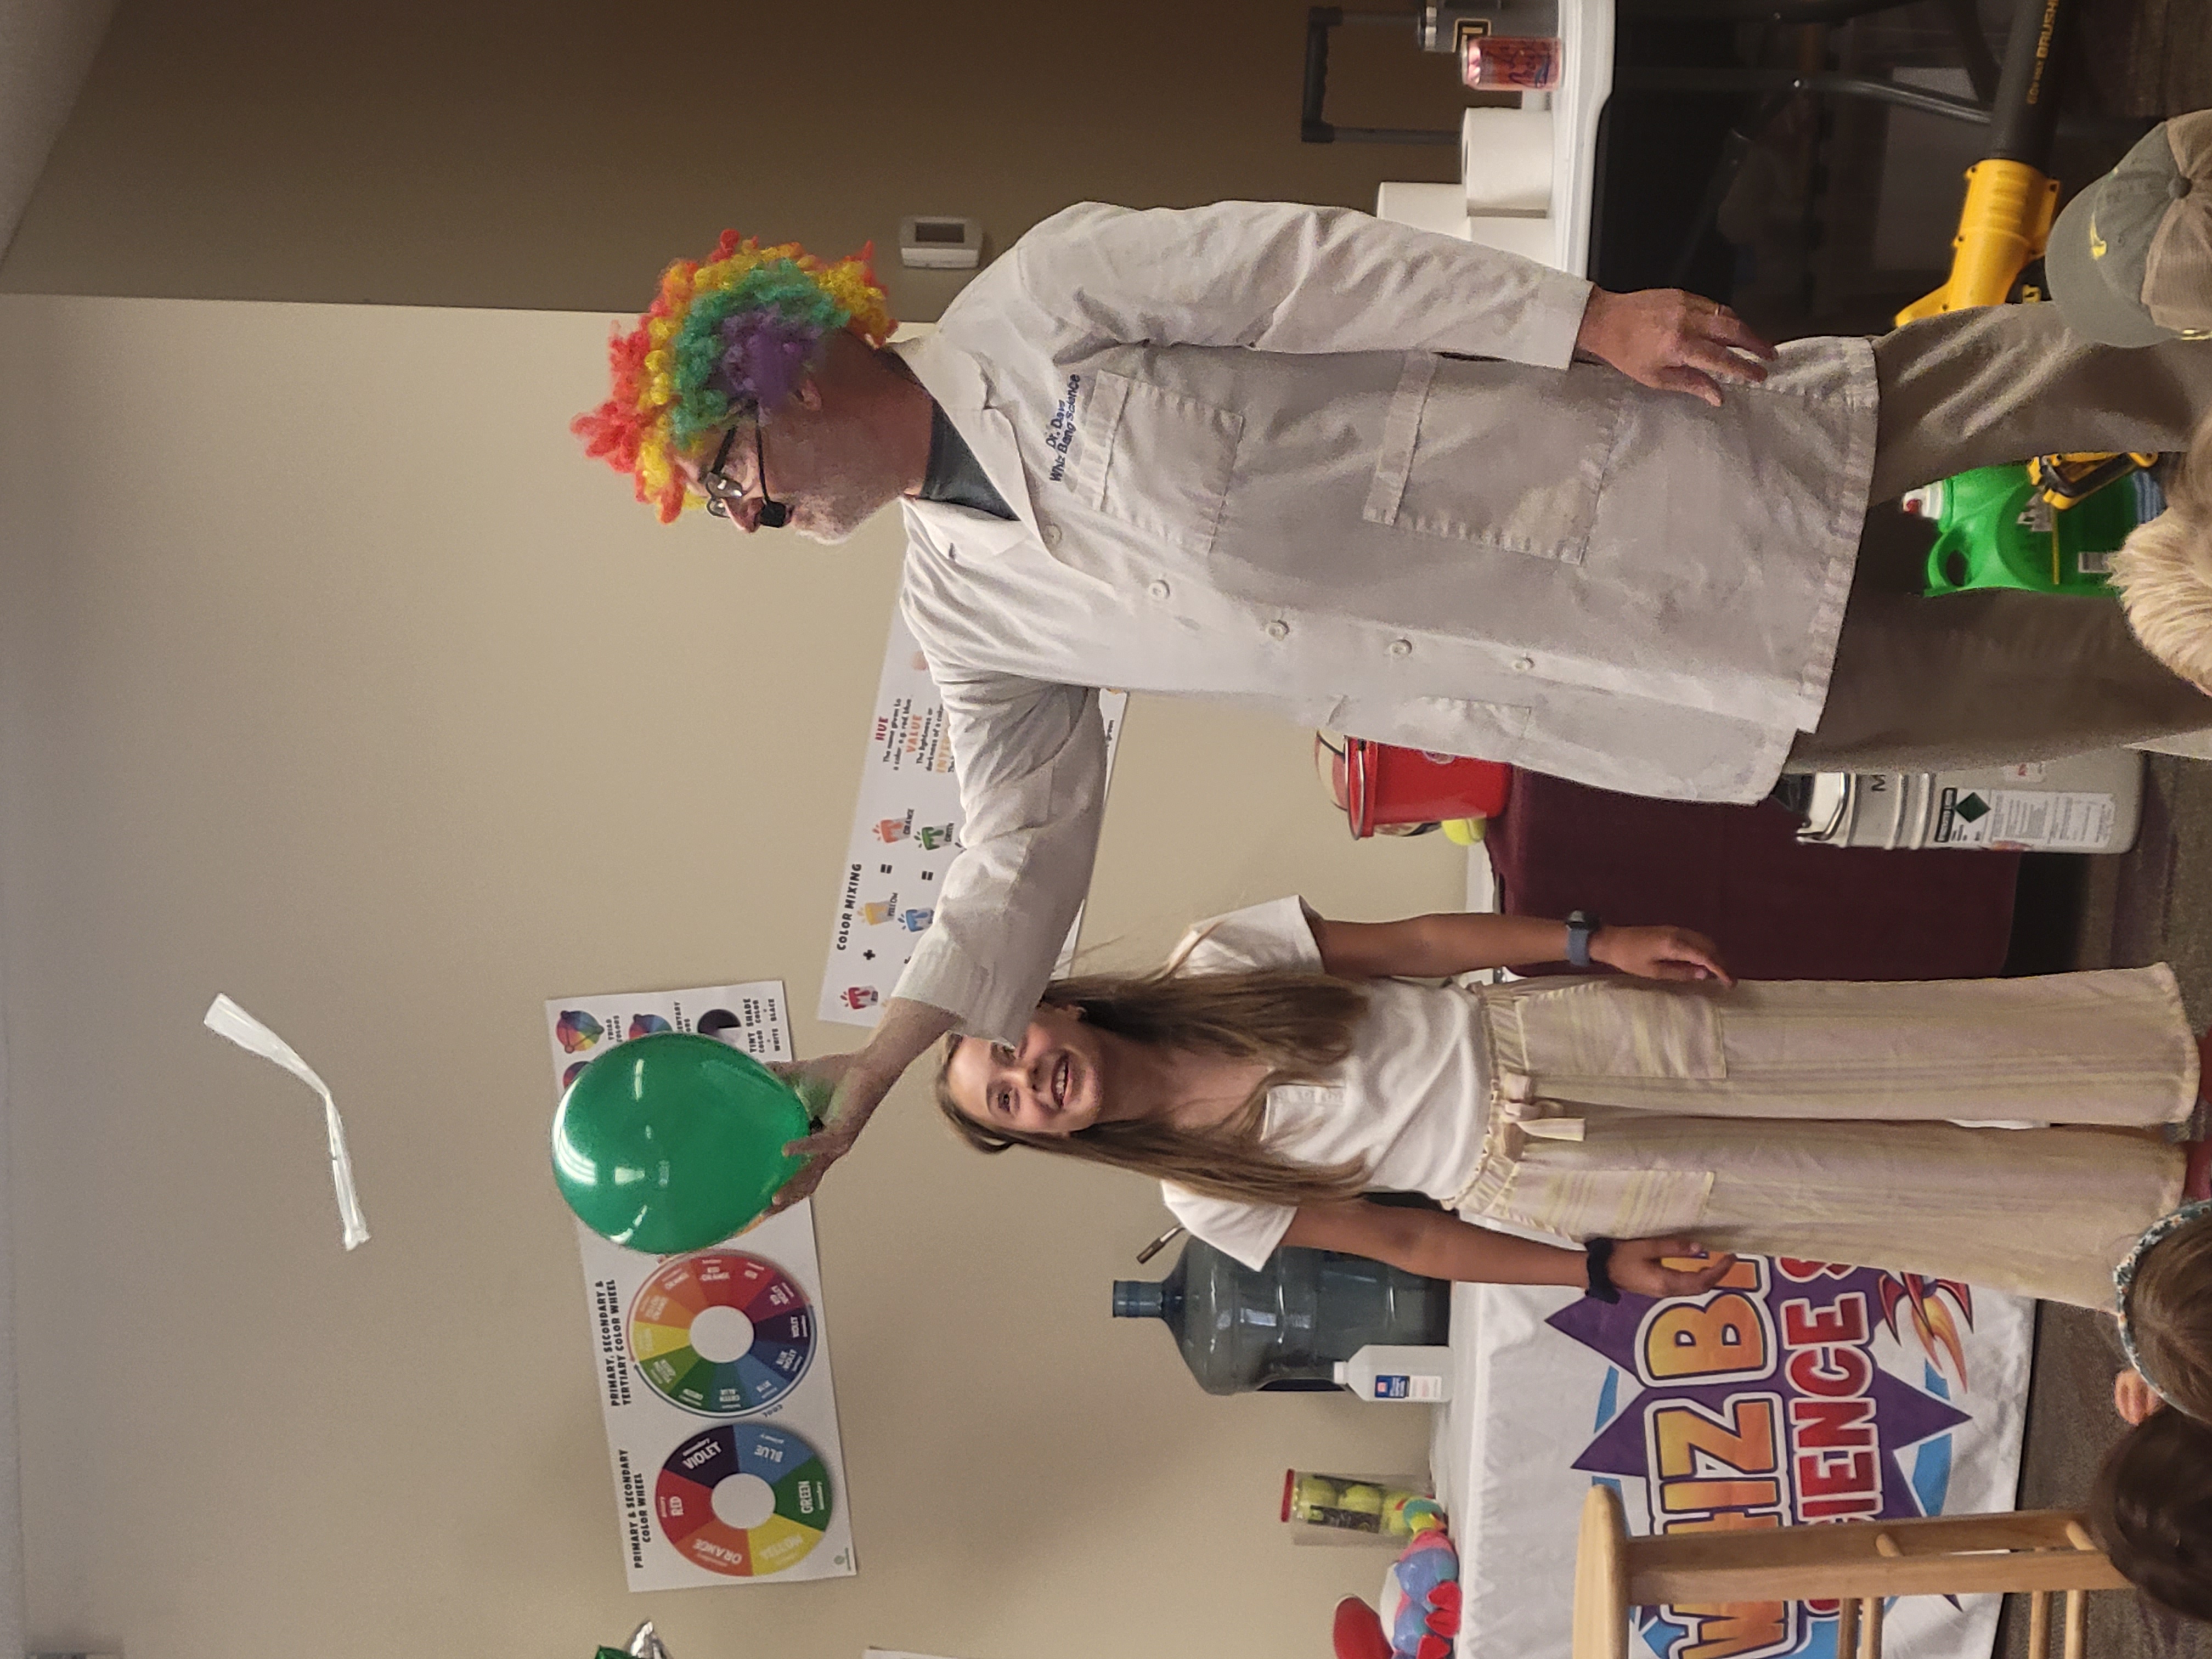 science presenter in a rainbow clown wig using a balloon and static to hold up part of a plastic bag